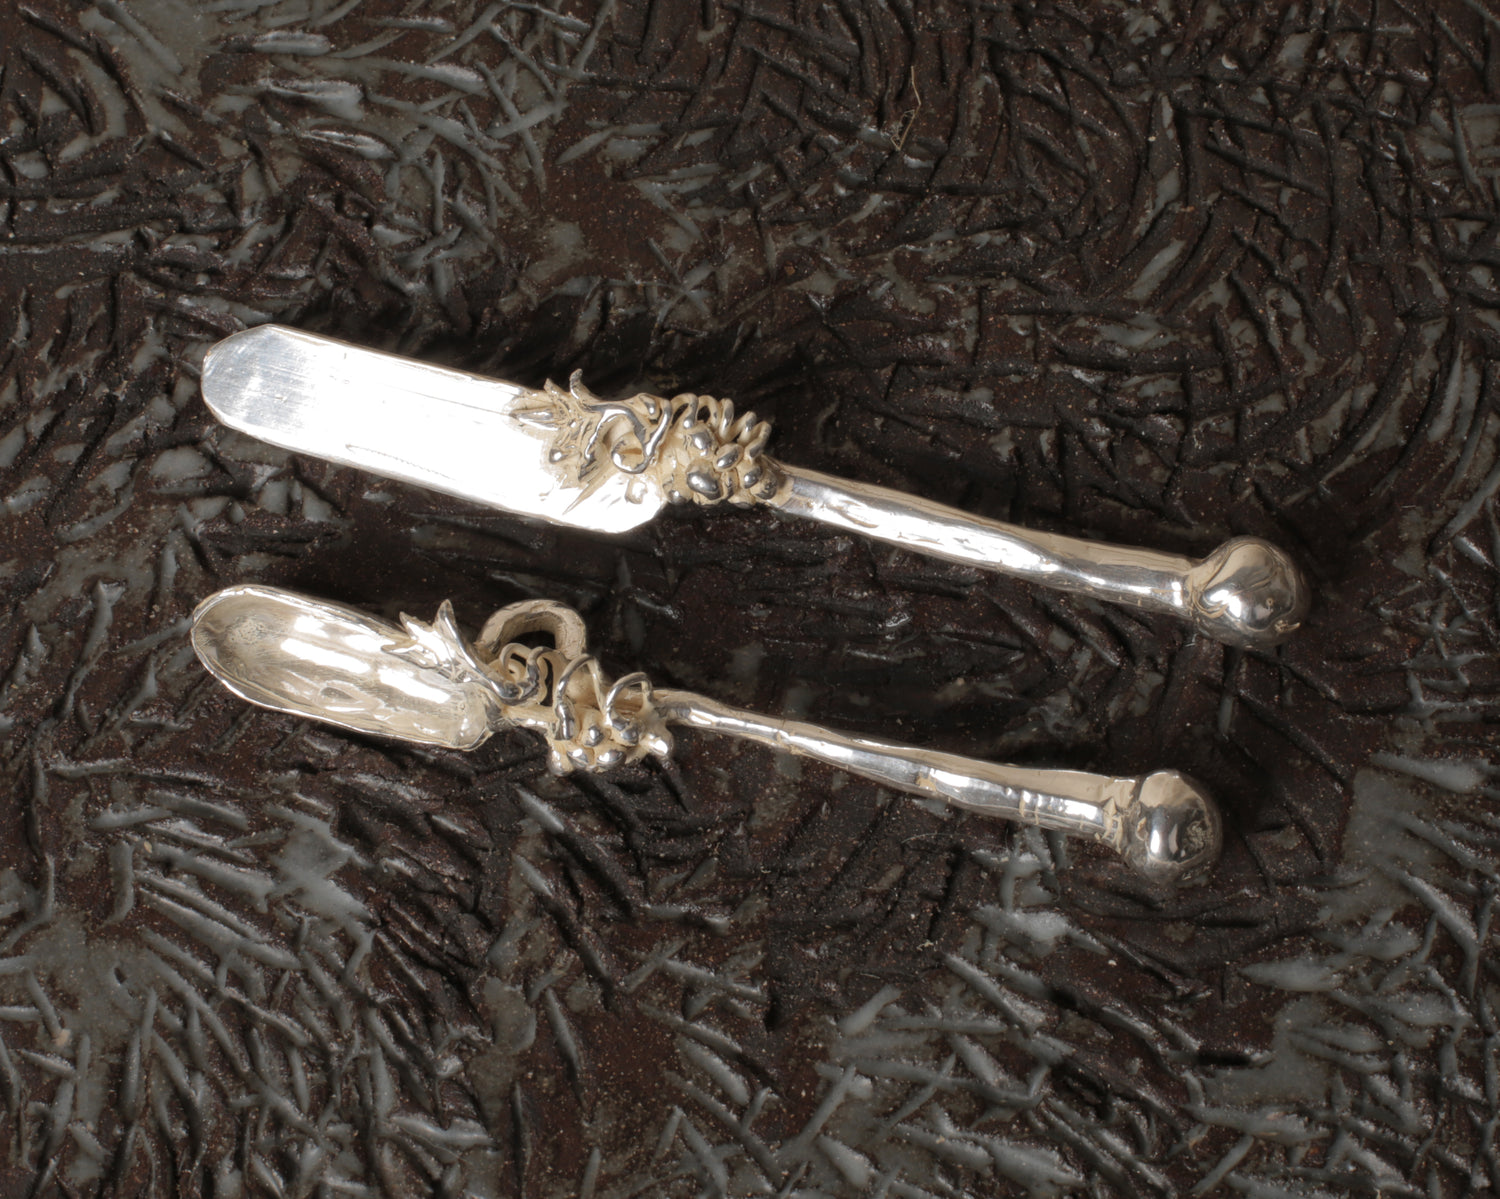 Small silver-plated brass butter knife and jam spoon by Zoé Mohm